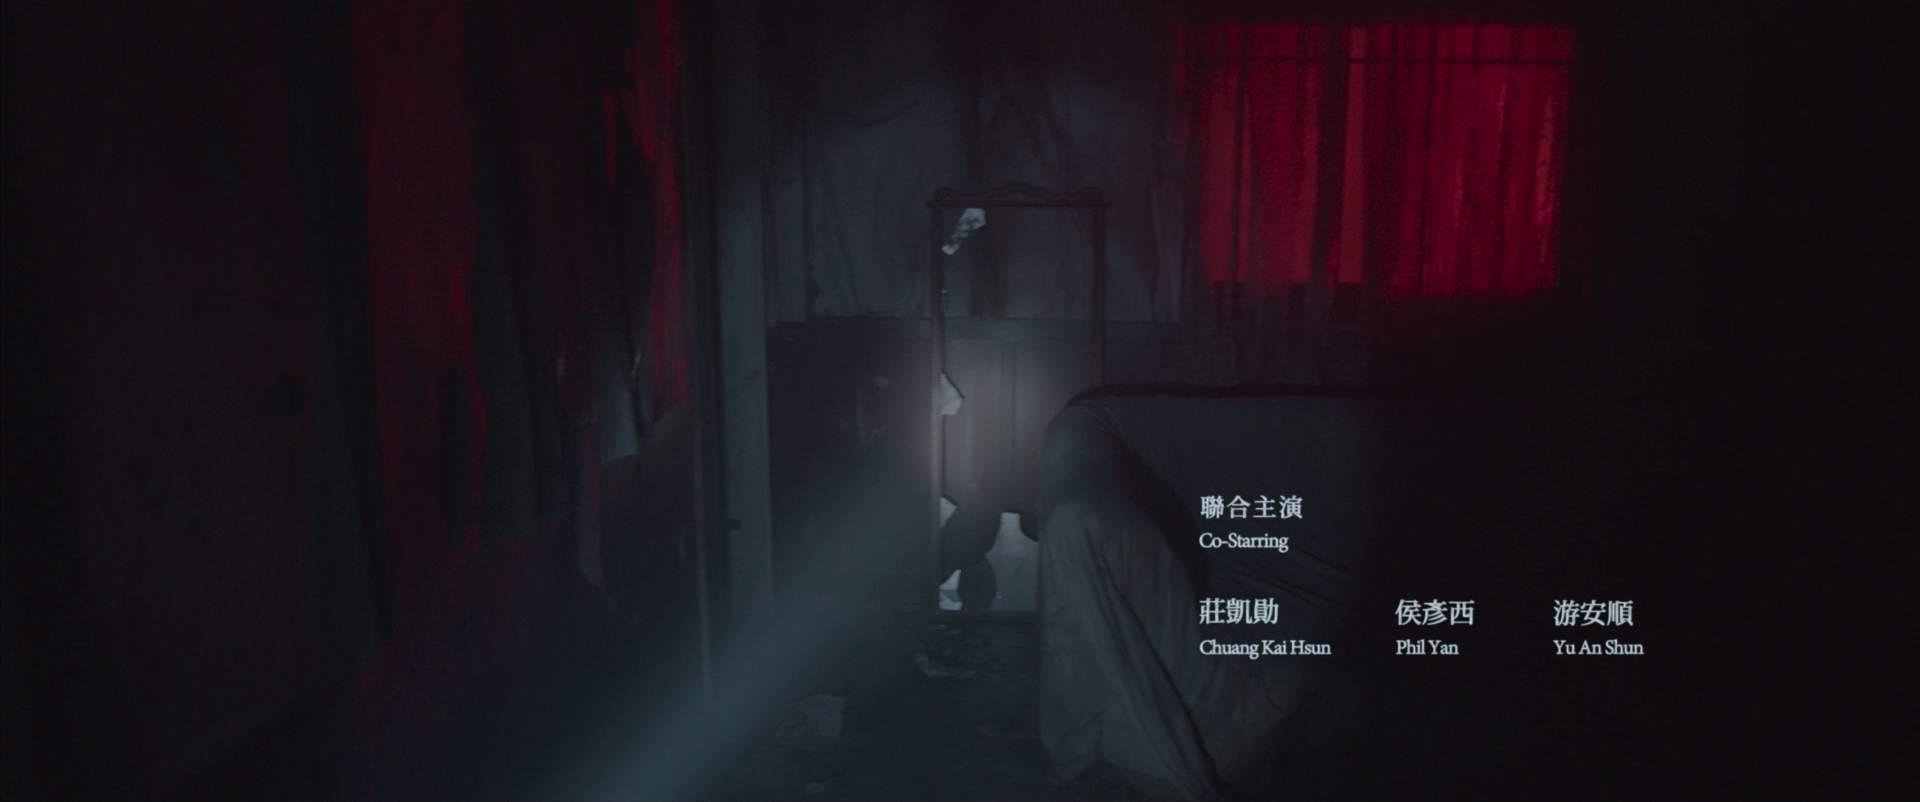 µķ The.Tenants.Downstairs.2016.CHINESE.1080p.BluRay.x264-WiKi 10.98GB-2.png